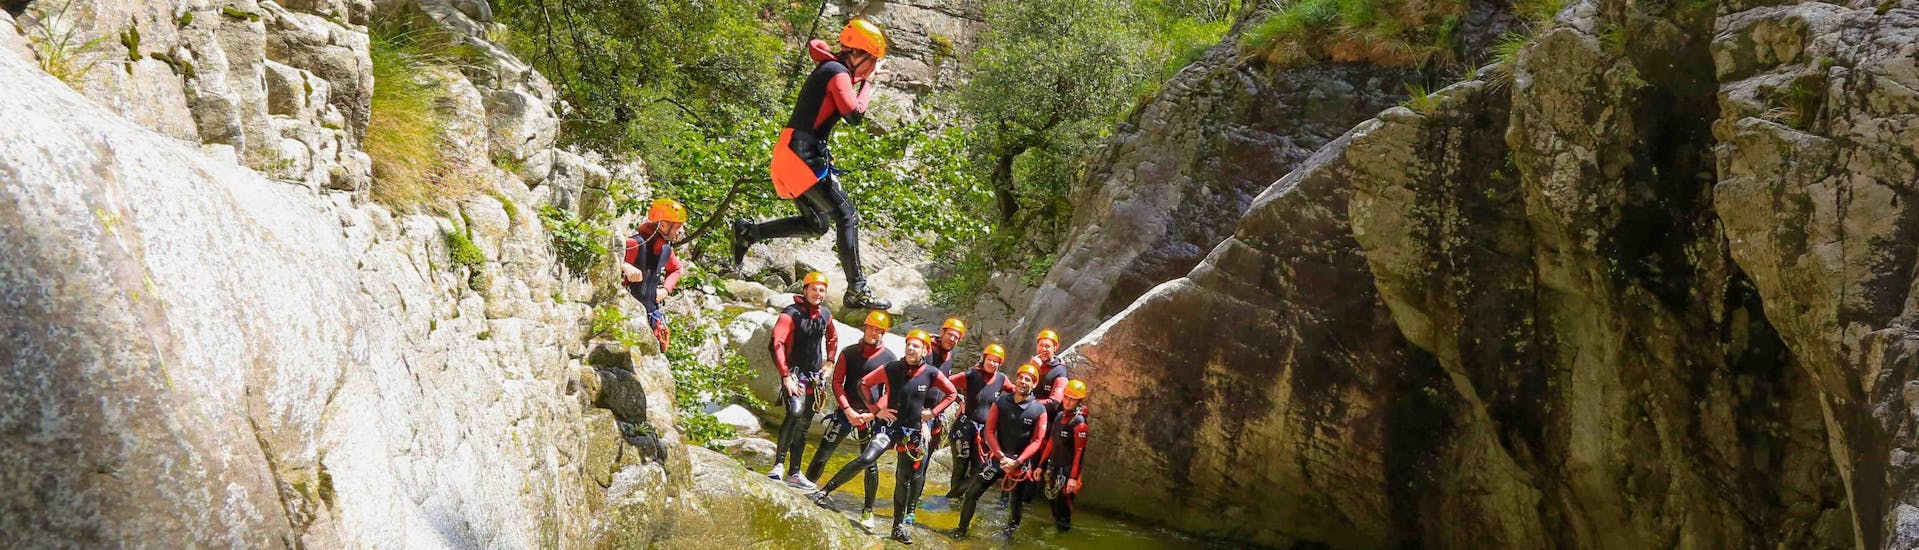 A tourist is jumping in the Zoicu canyon during his activity canyoning for families with reves de cimes.